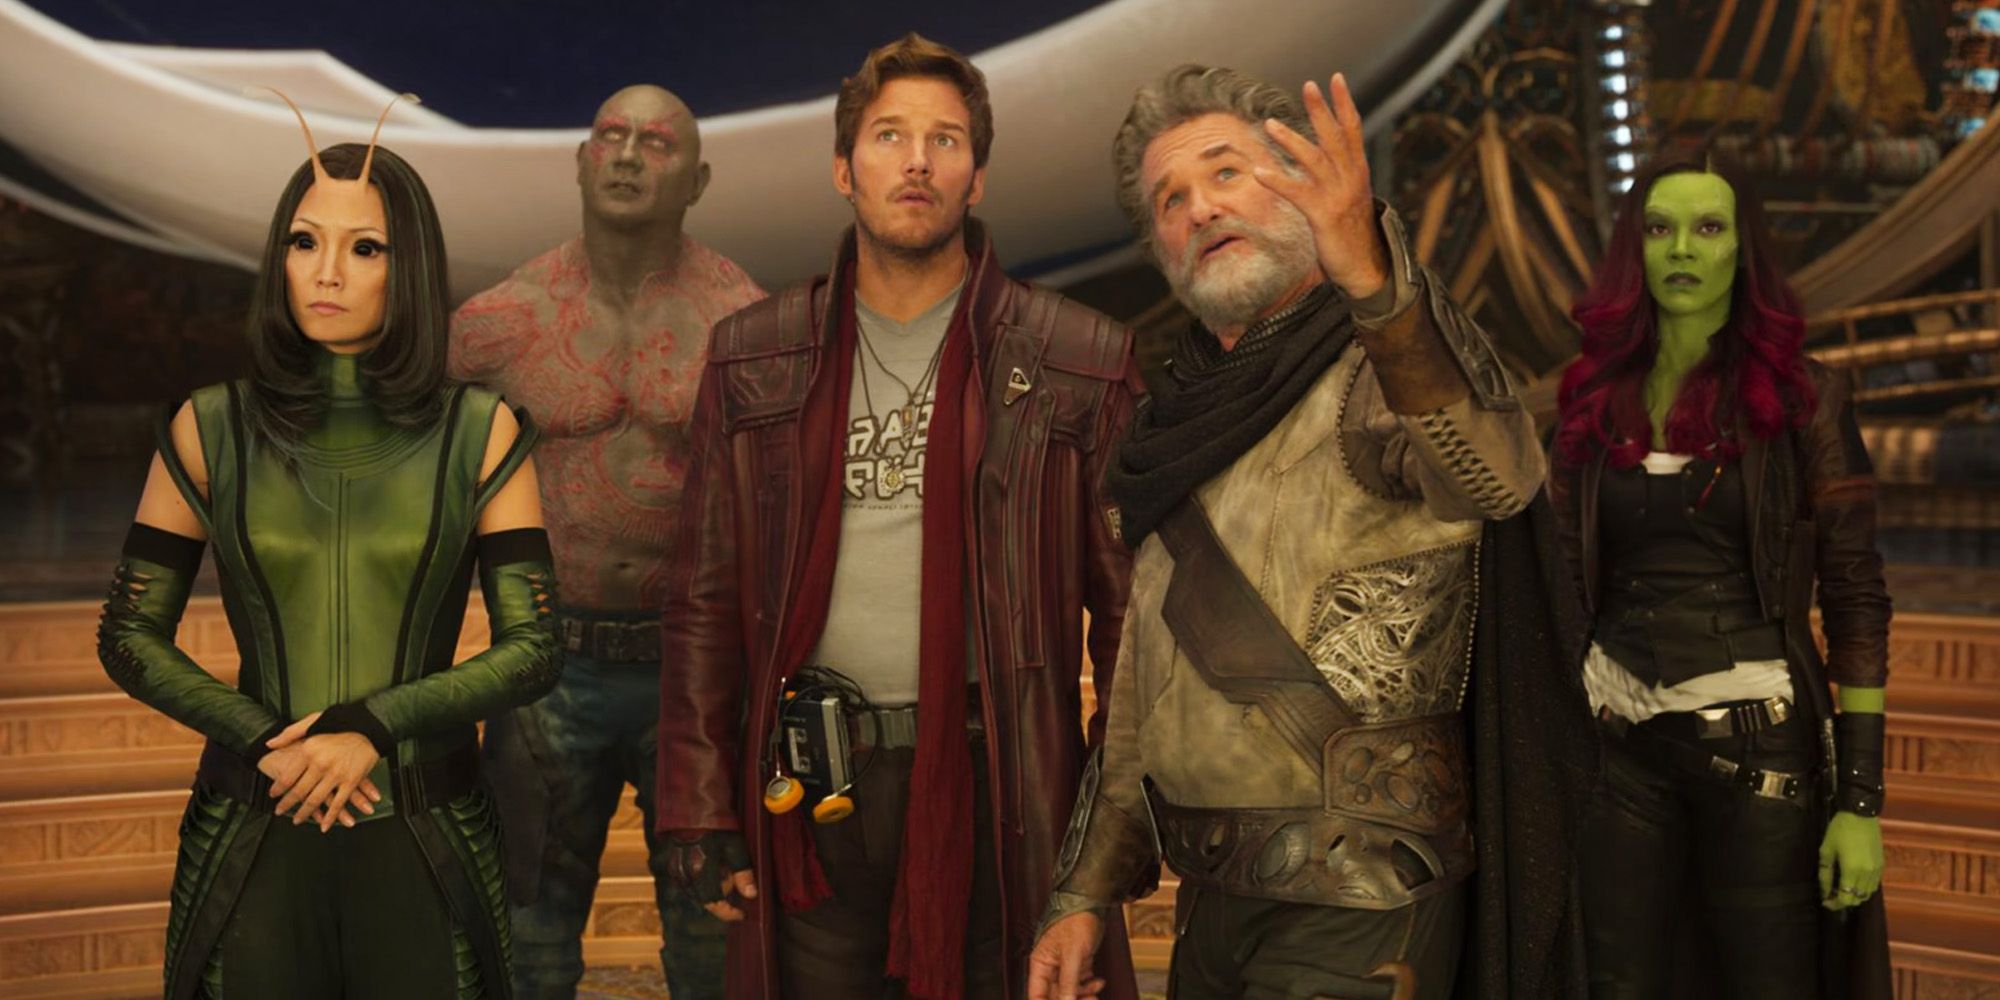 Ego showing the Guardians his home in the 2017 movie Guardians of the Galaxy Vol. 2.